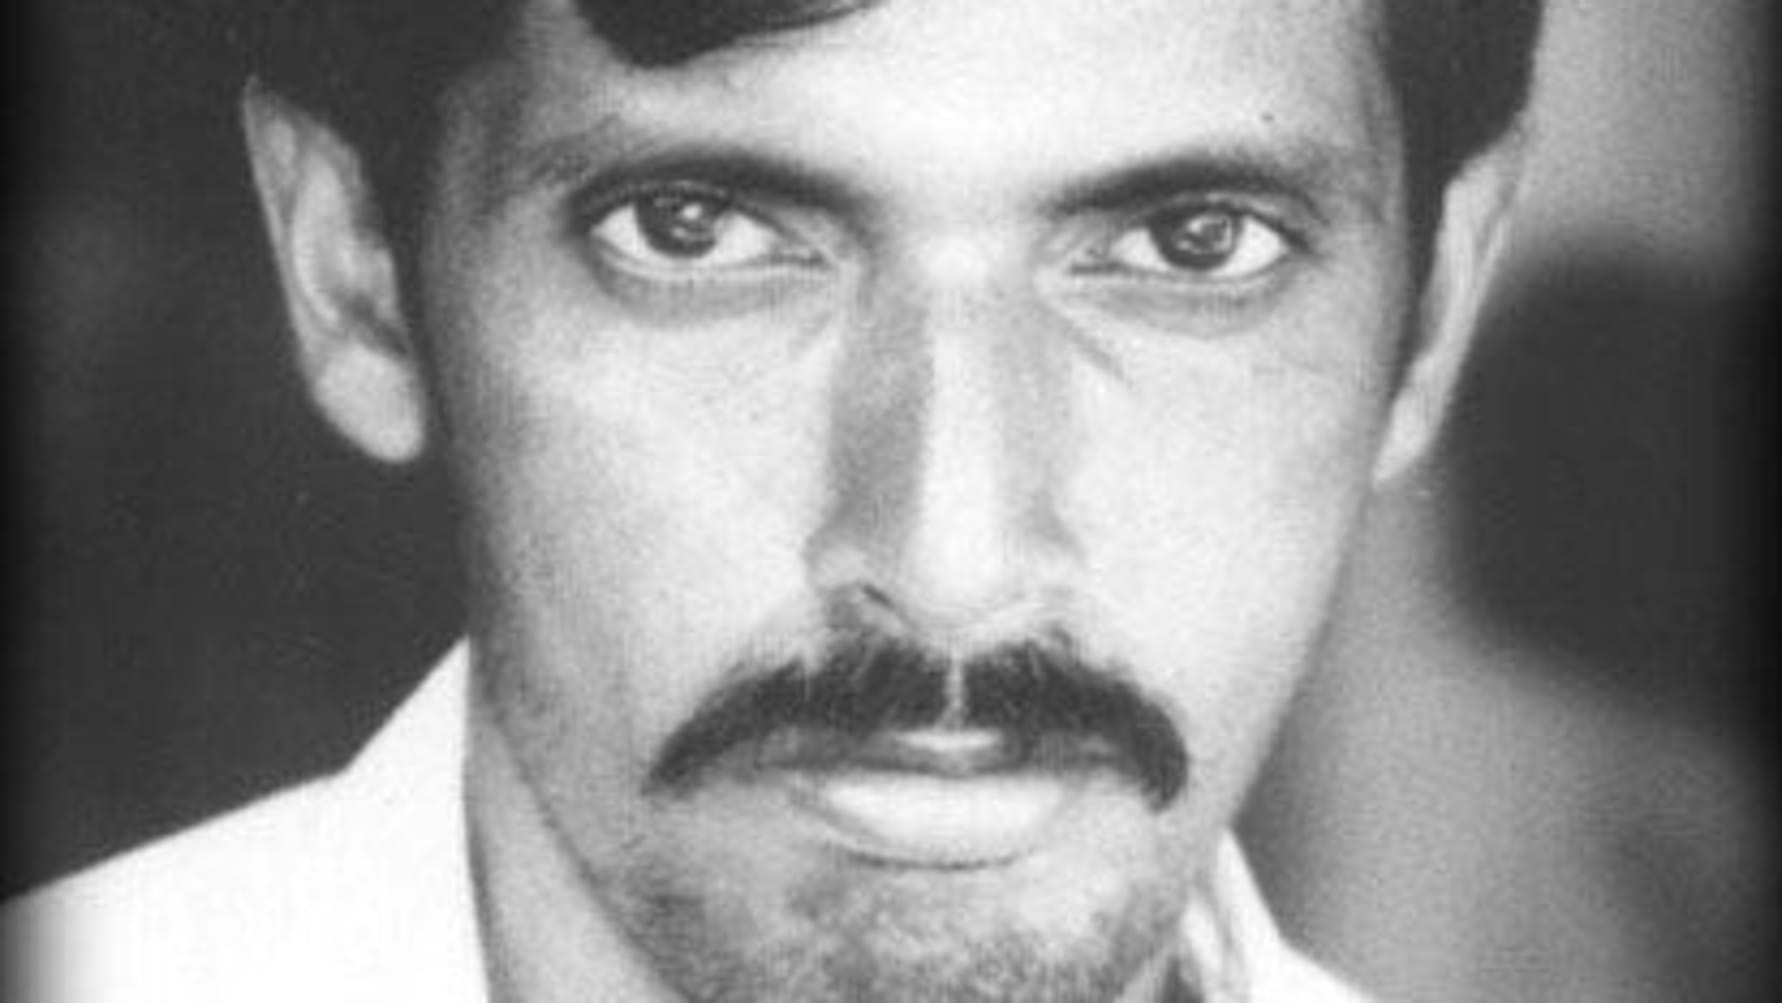 Rights Groups Welcome Arrest in the UK of Suspected Killer of BBC Journalist in Sri Lanka 22-years ago